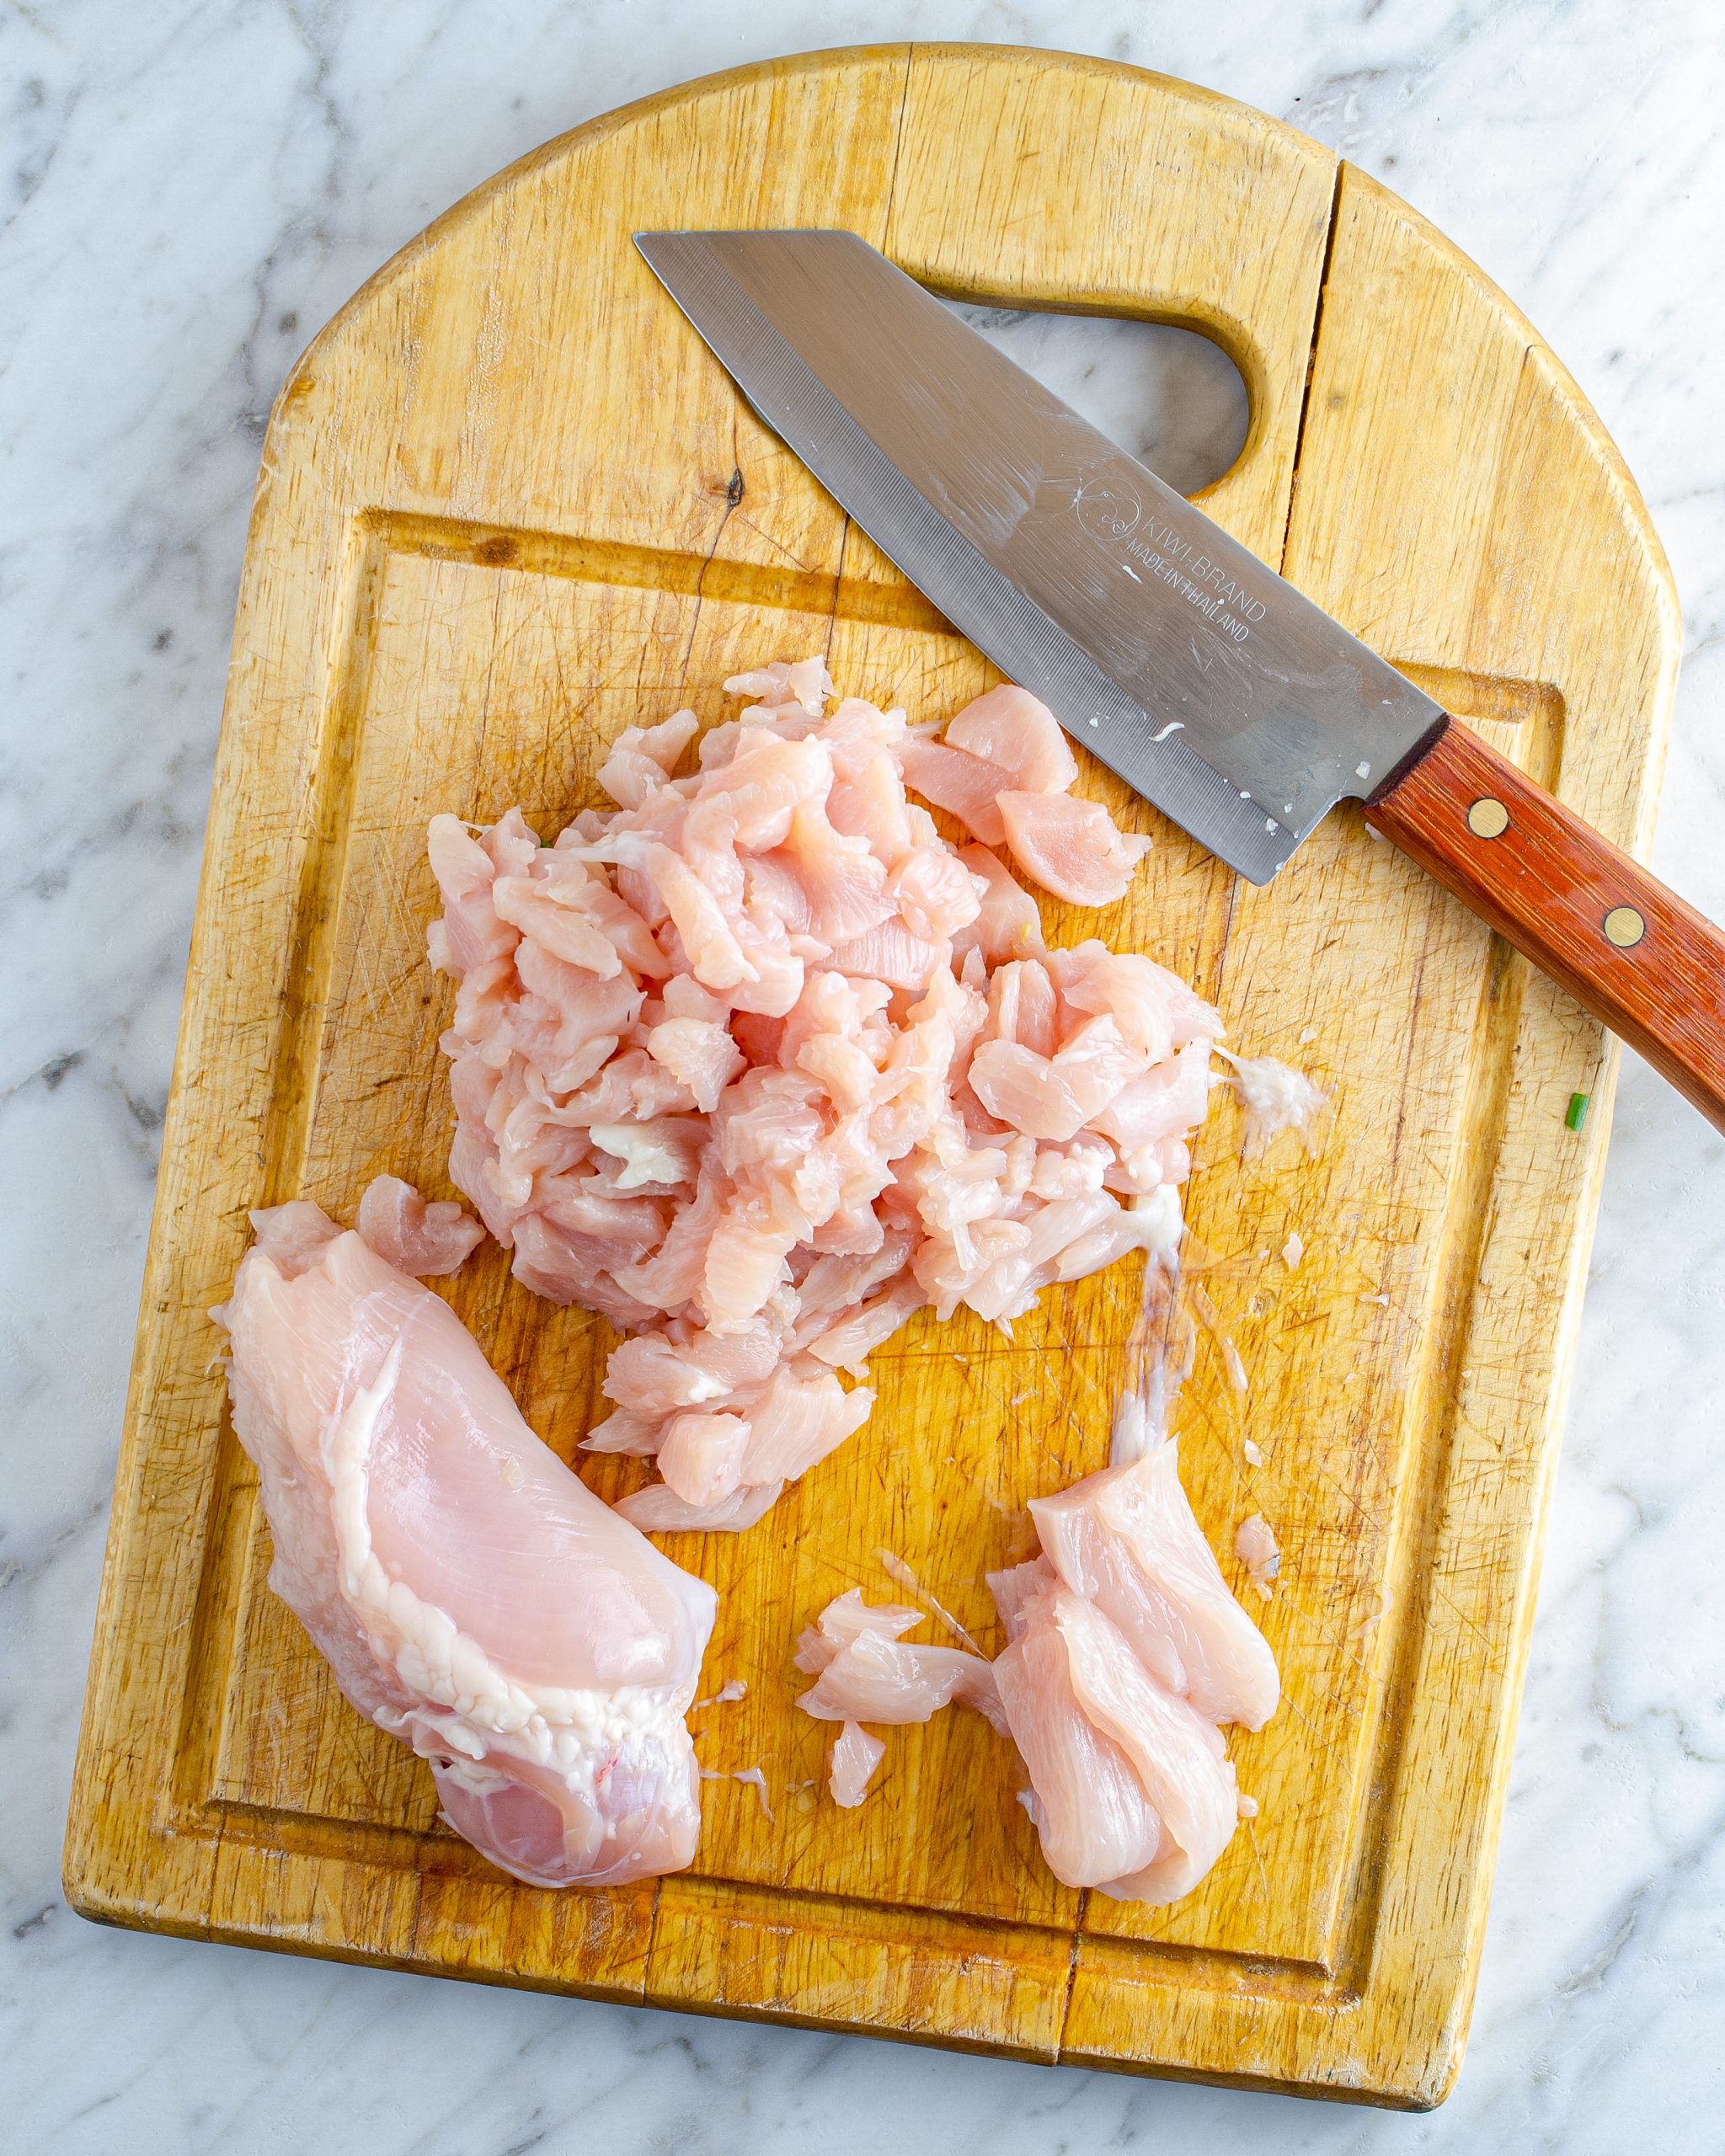 Slice the chicken breast into very thin pieces. 